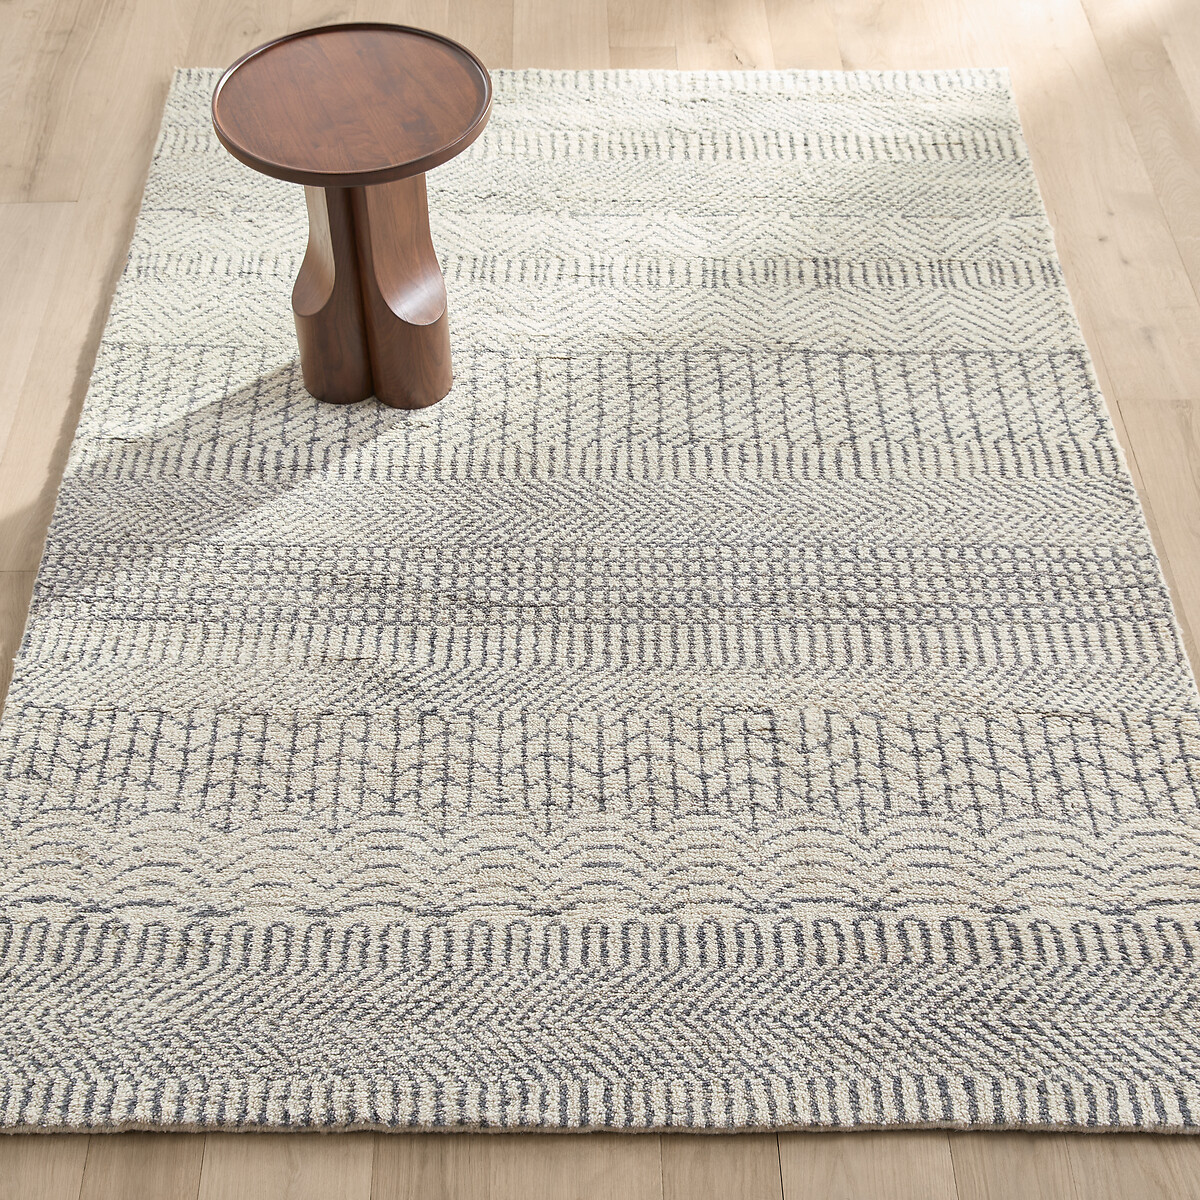 Fatonia Hand Knotted Wool Rug Ecru, Why Are Wool Rugs Better